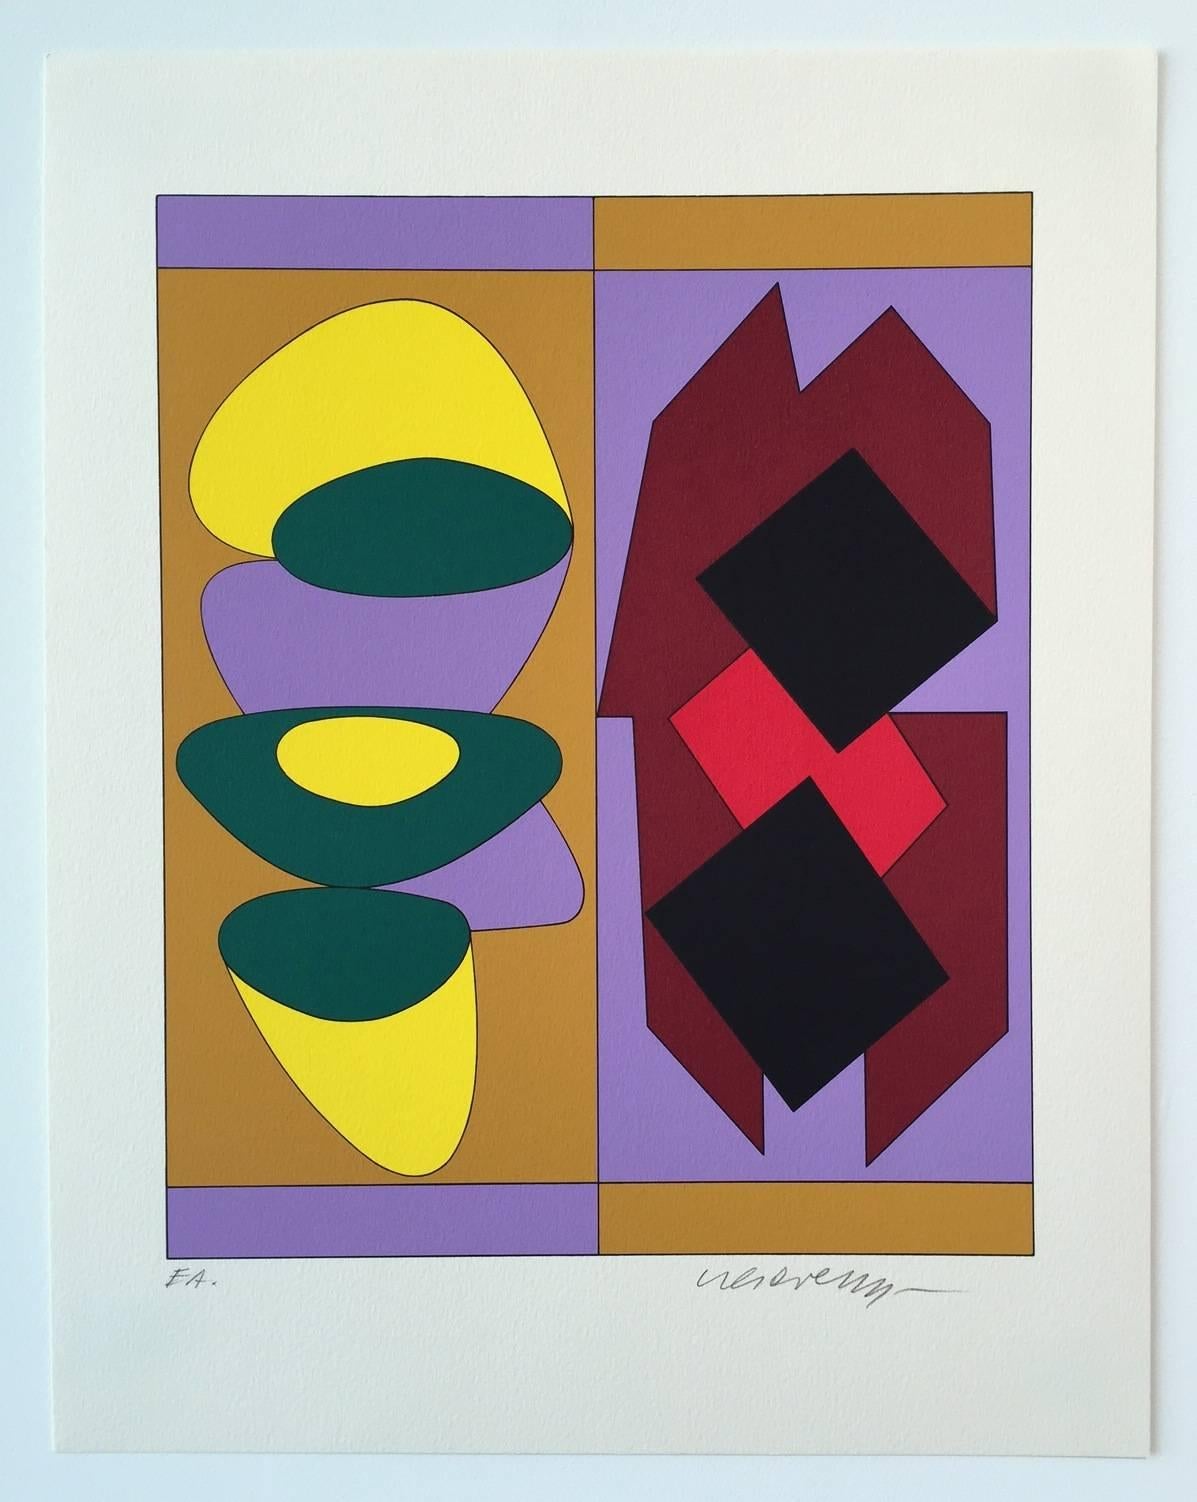 Victor Vasarely Abstract Print - Kris-Bille, from Ion Album